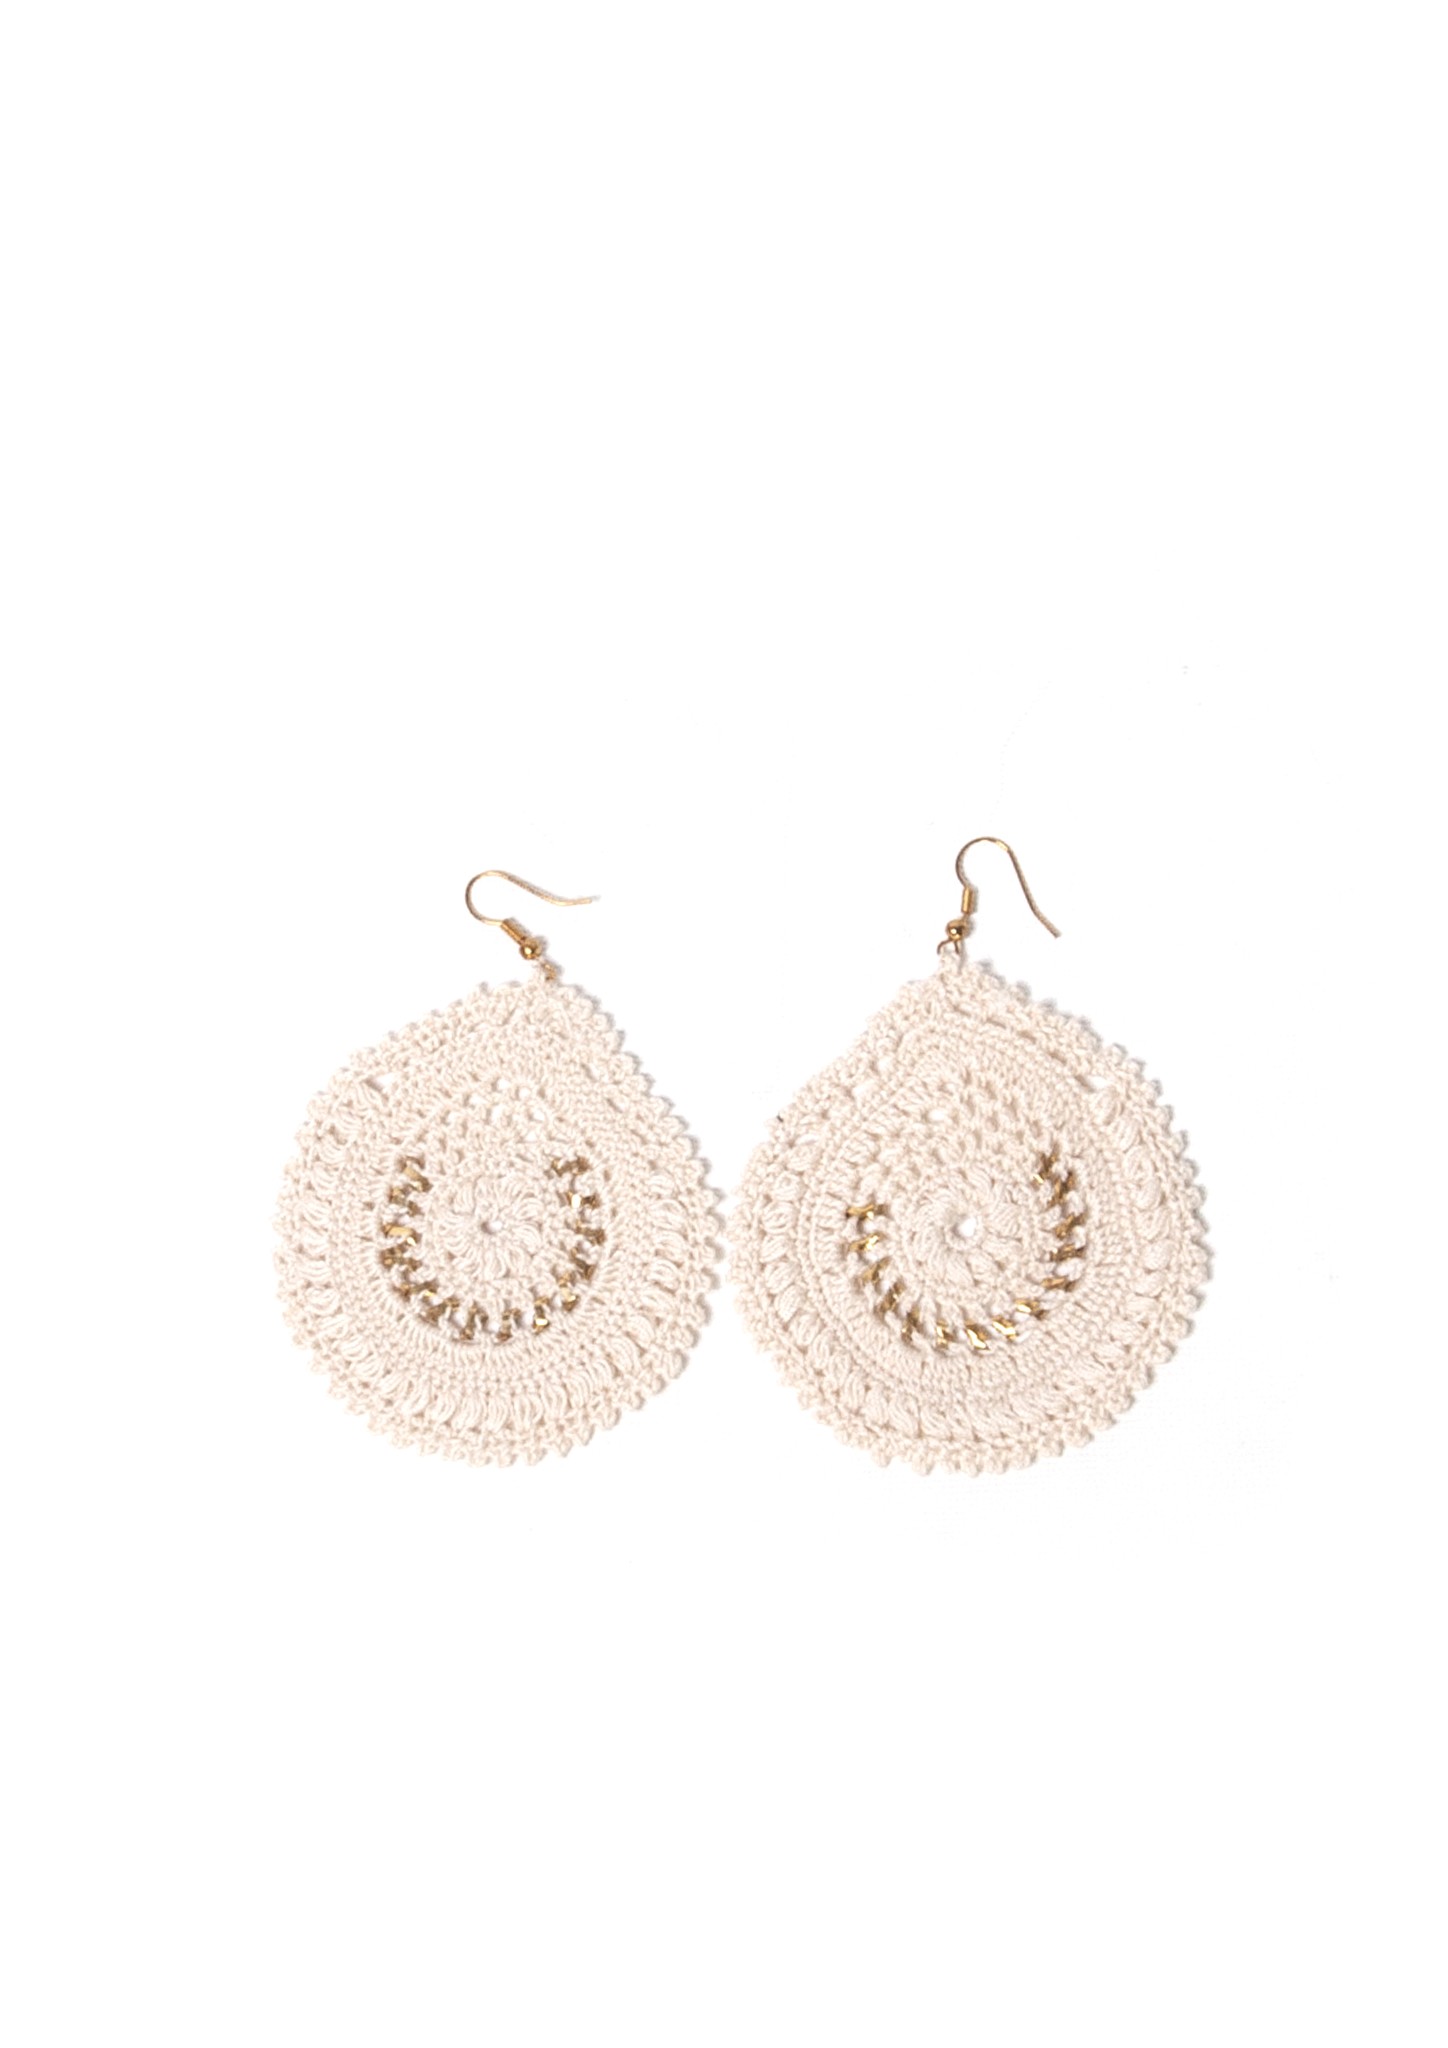 Lace Earrings with Wire Embroidery